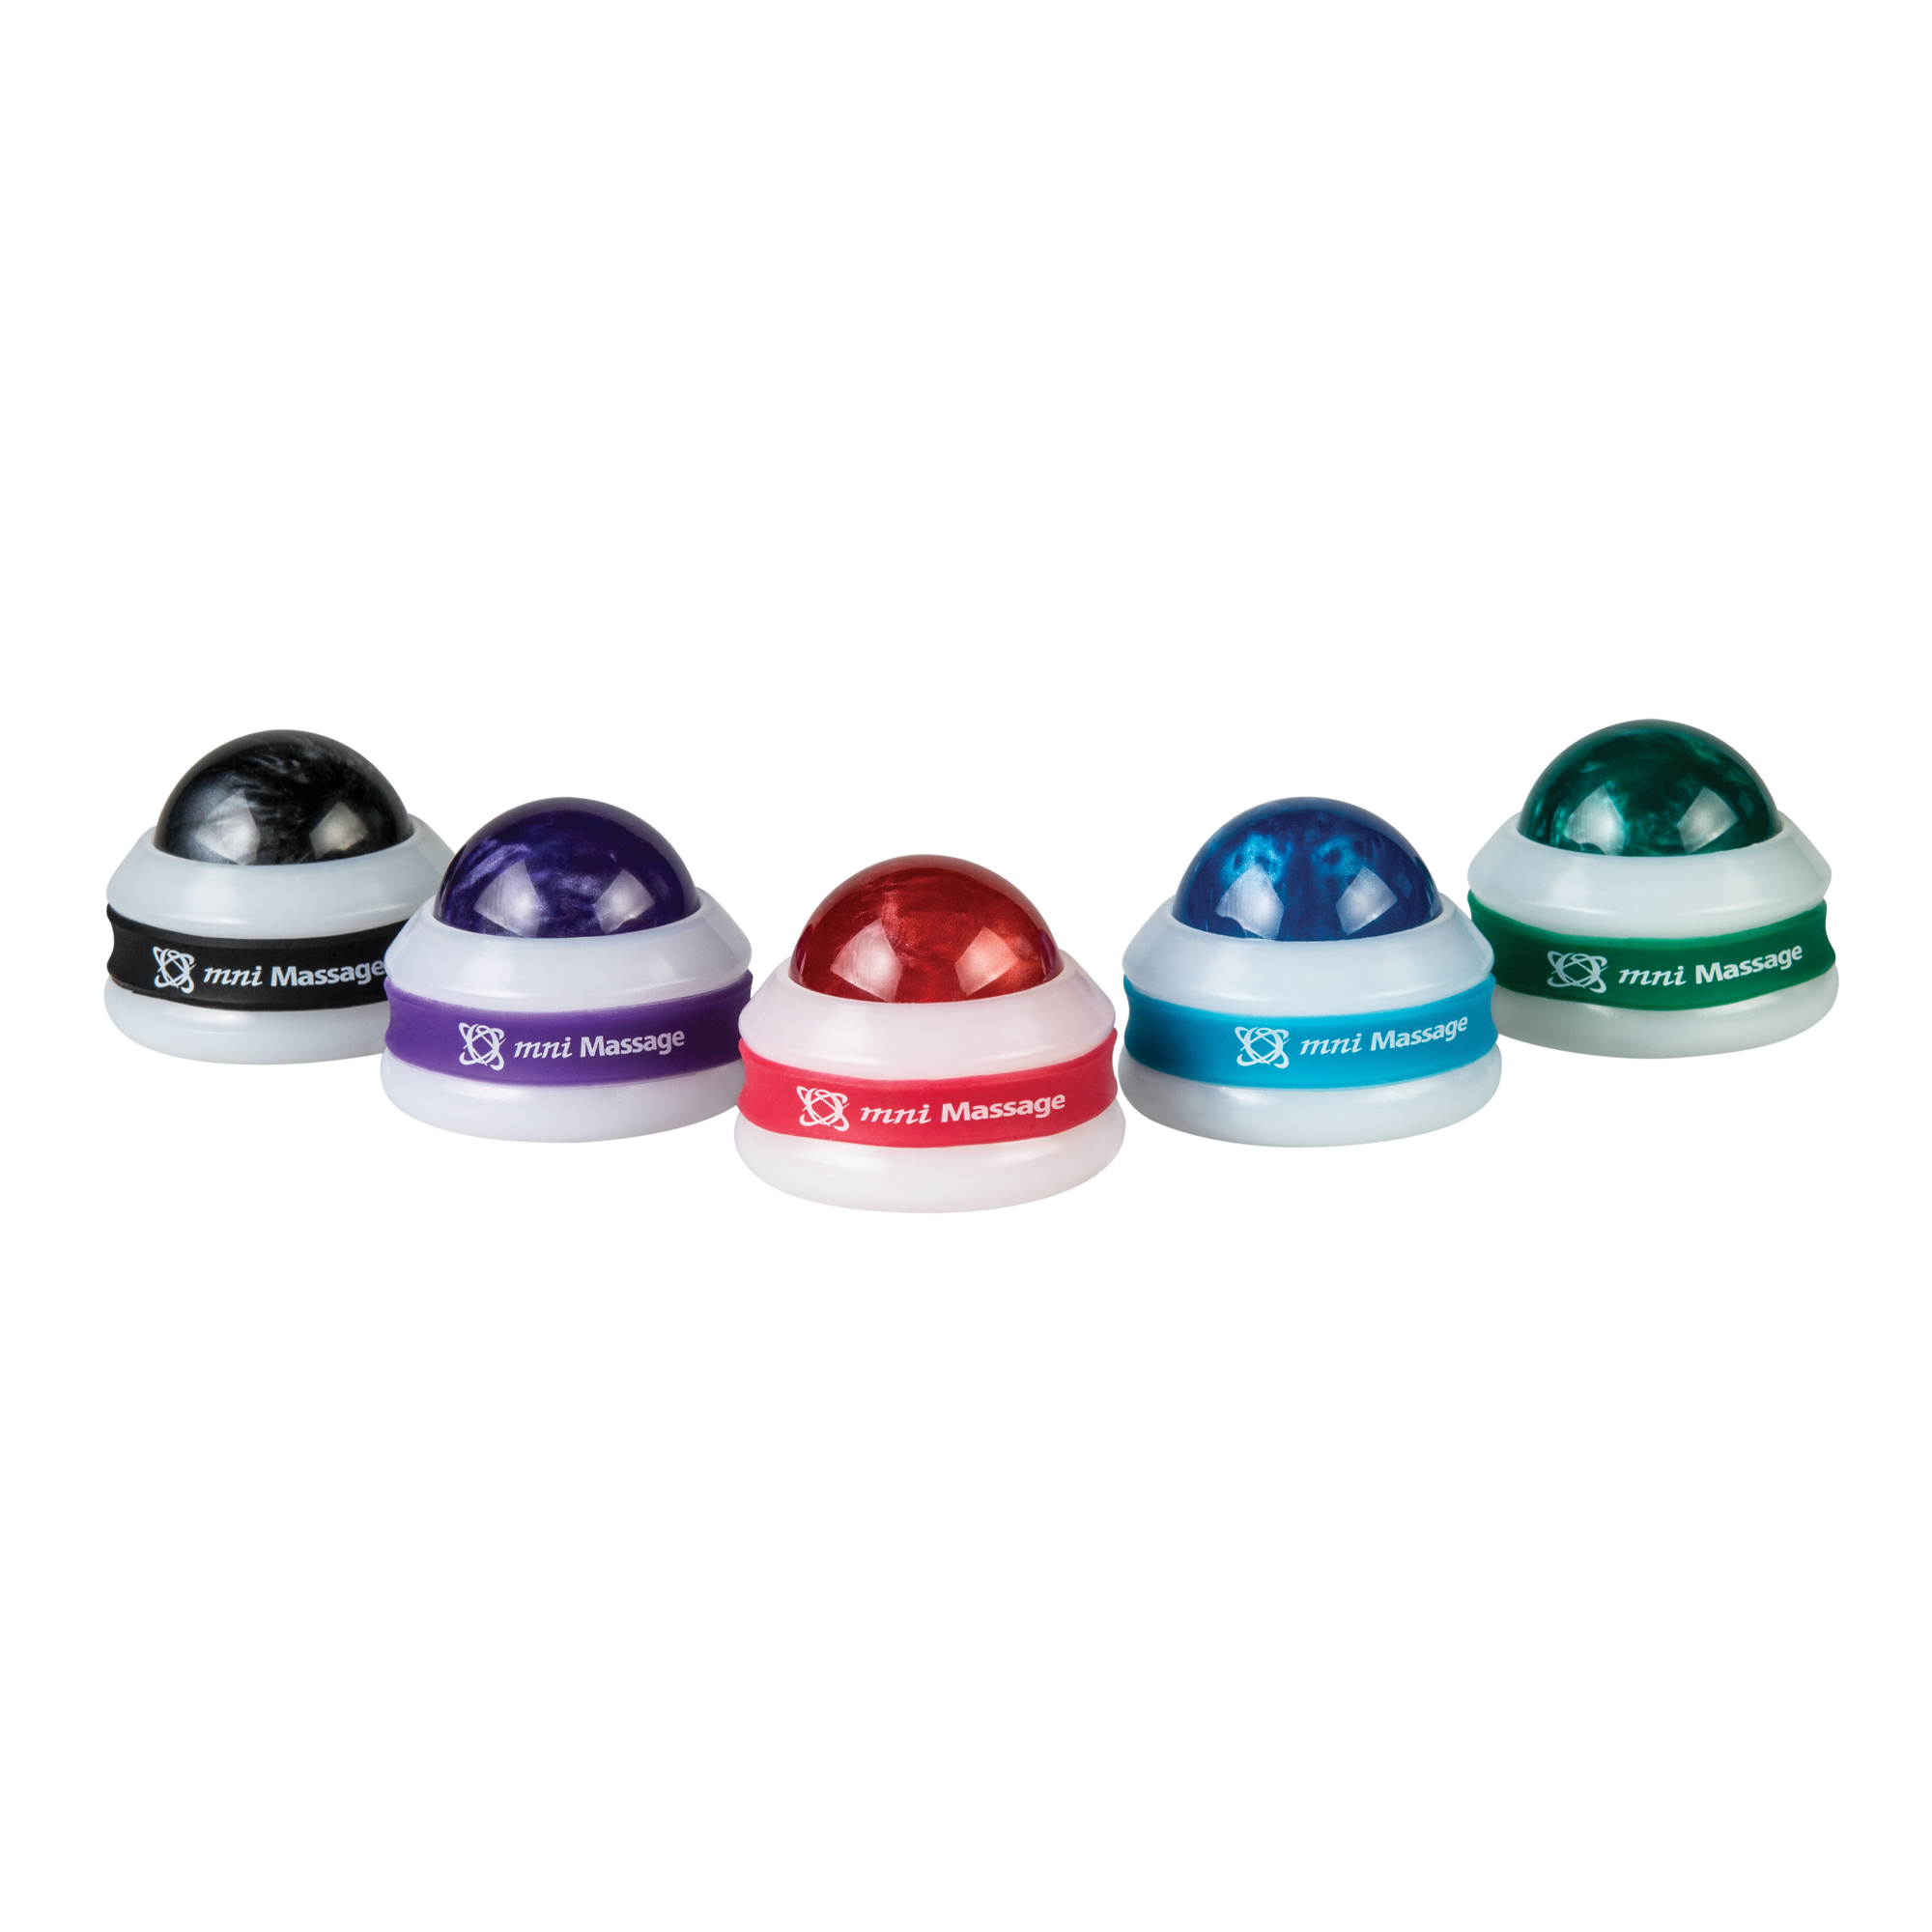 Image of the Core Products Omni Mini Roller products.